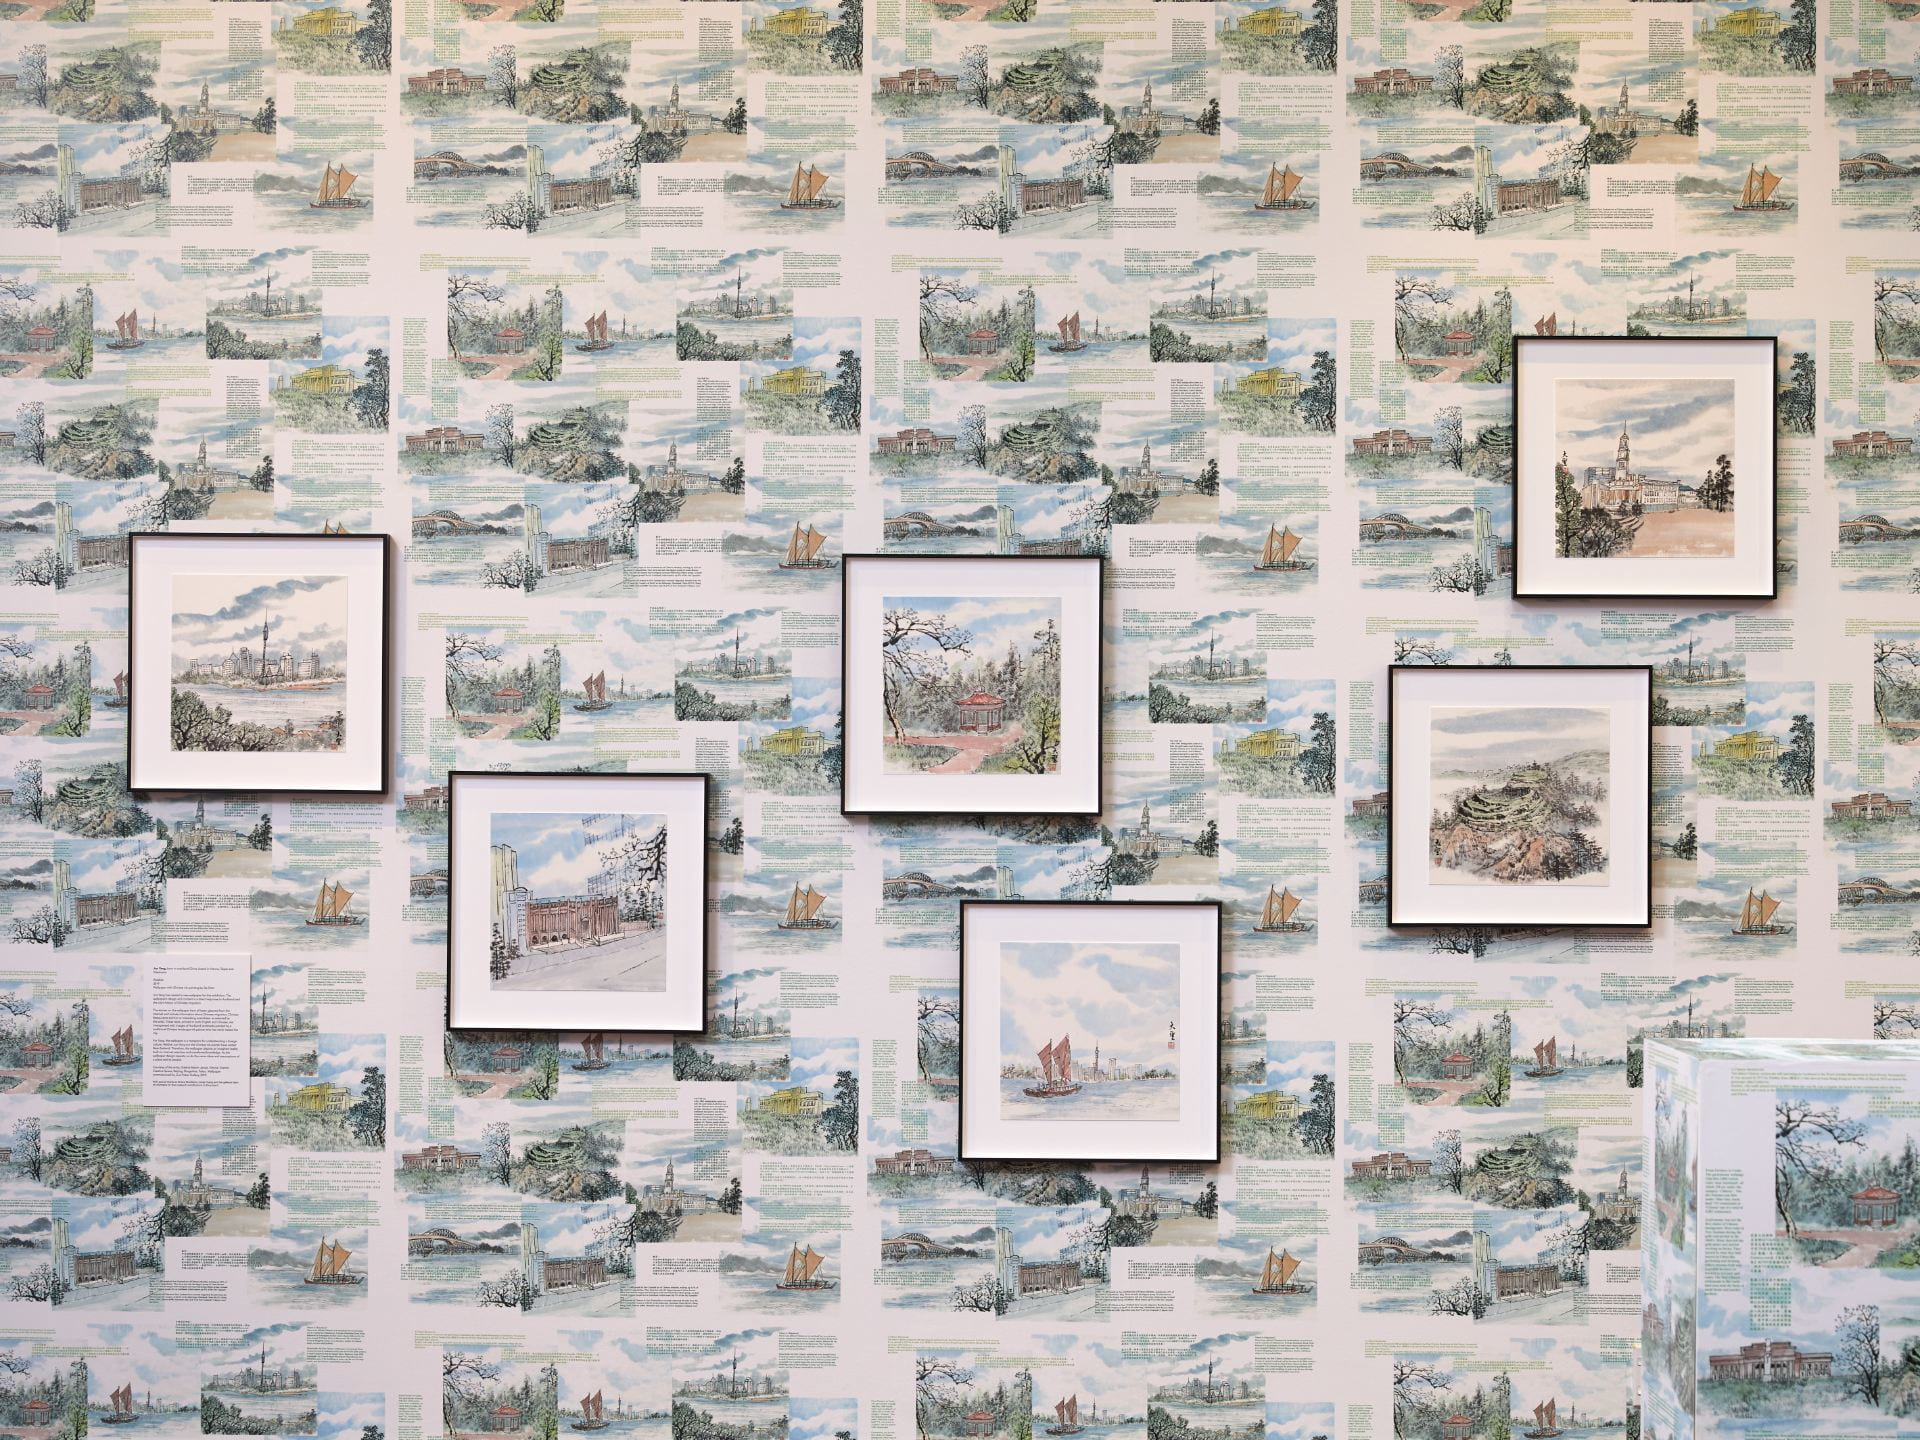 Six watercolours of Auckland landmarks hang on a wall, which has been wallpapered with repeating copies of those same prints.